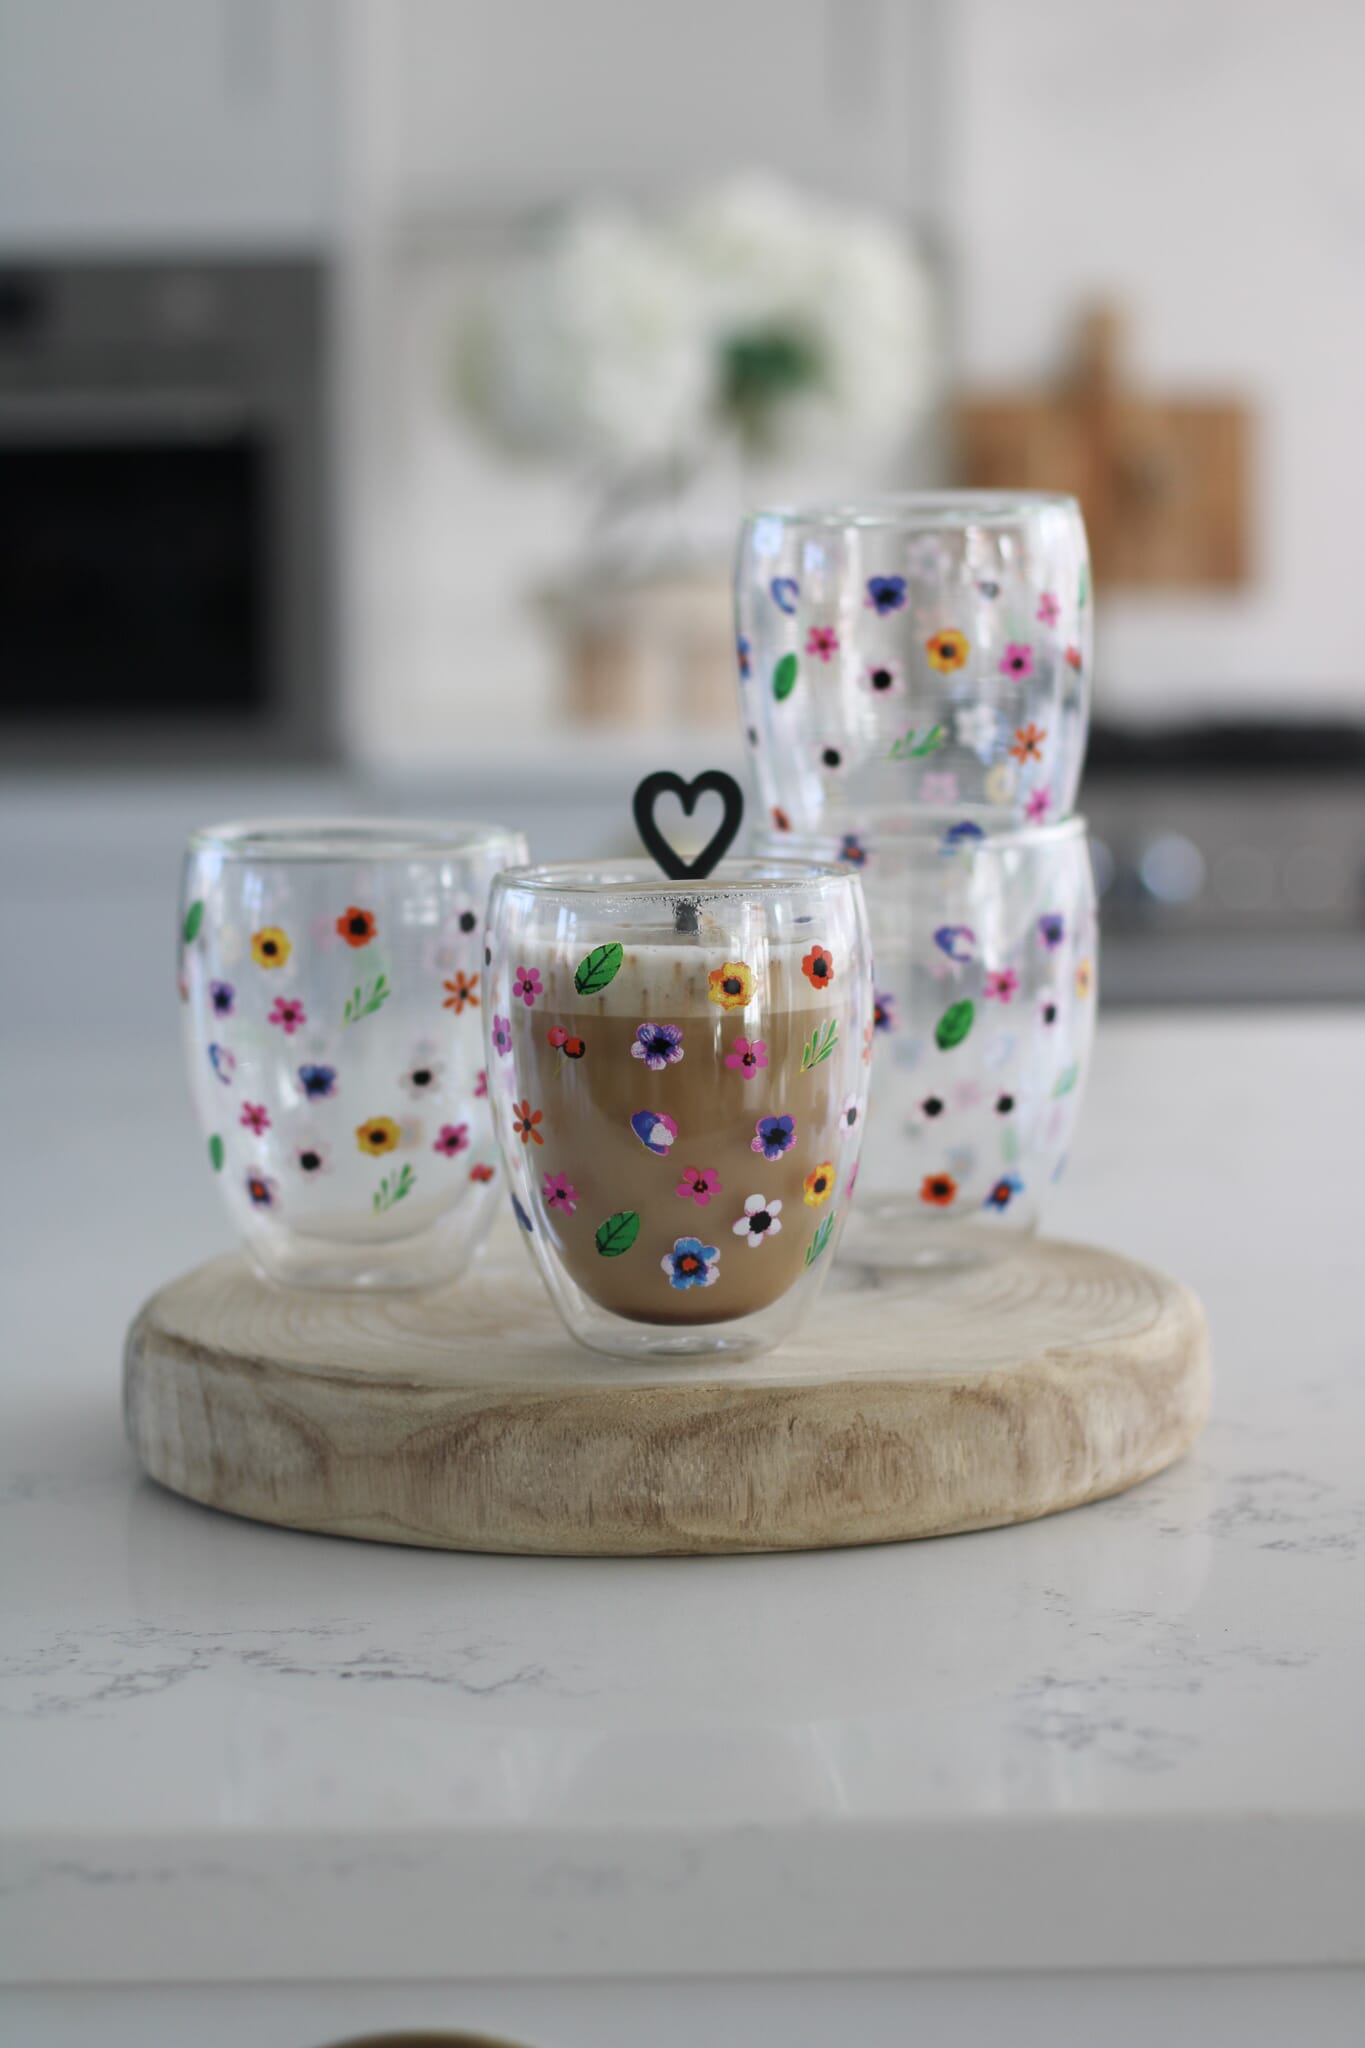 Don't Ruin Your Cute Mug Collection! Here's How to Remove Stains from Mugs